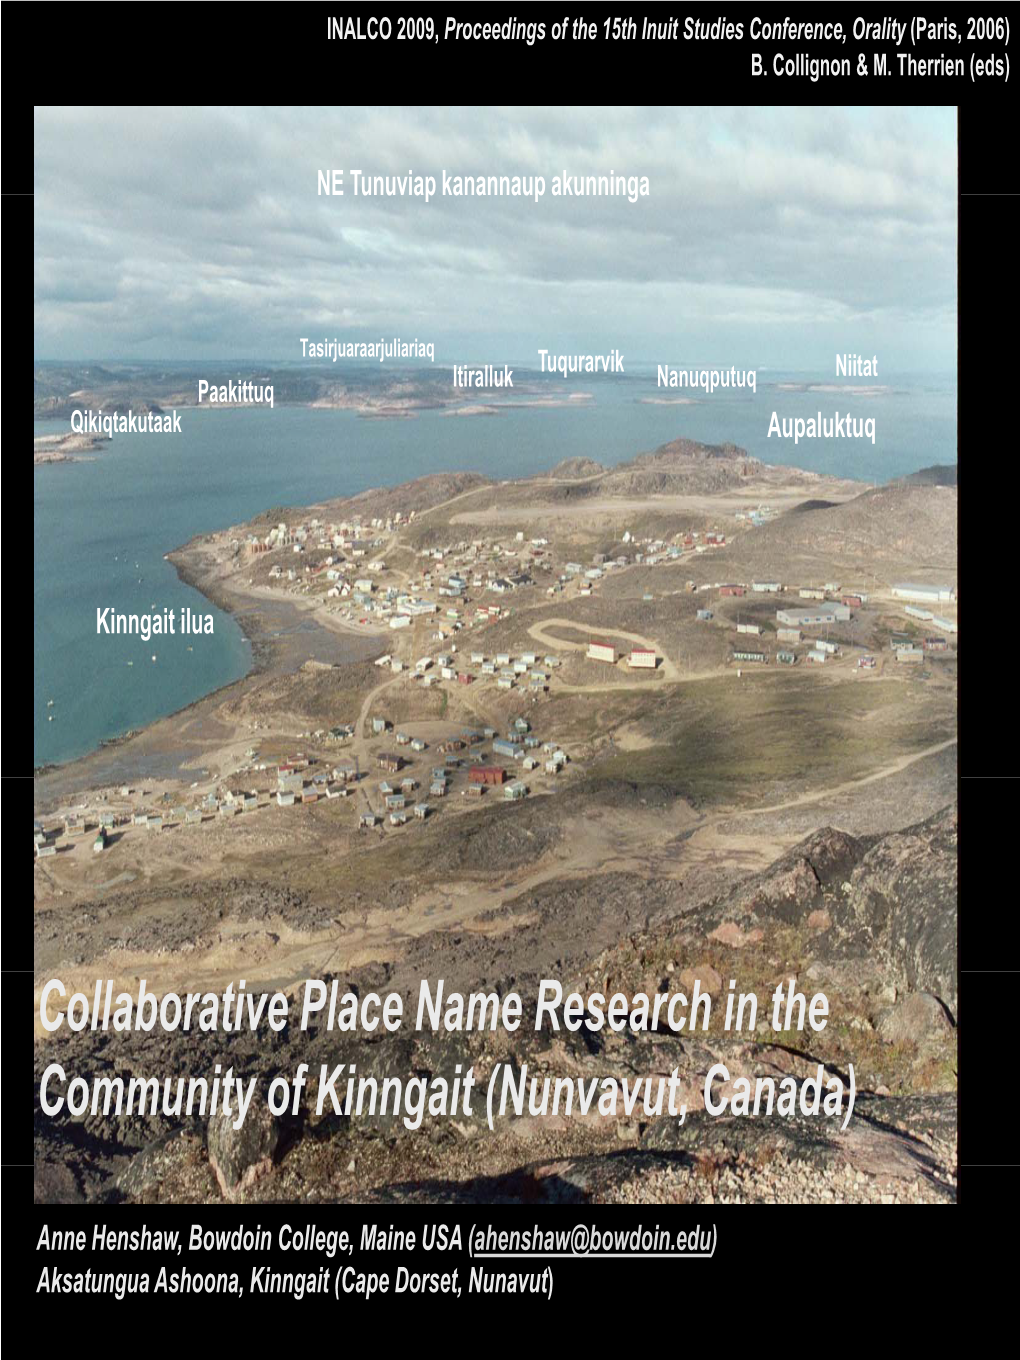 Collaborative Place Name Research in the Community of Kinngait (Nunvavut, Canada)